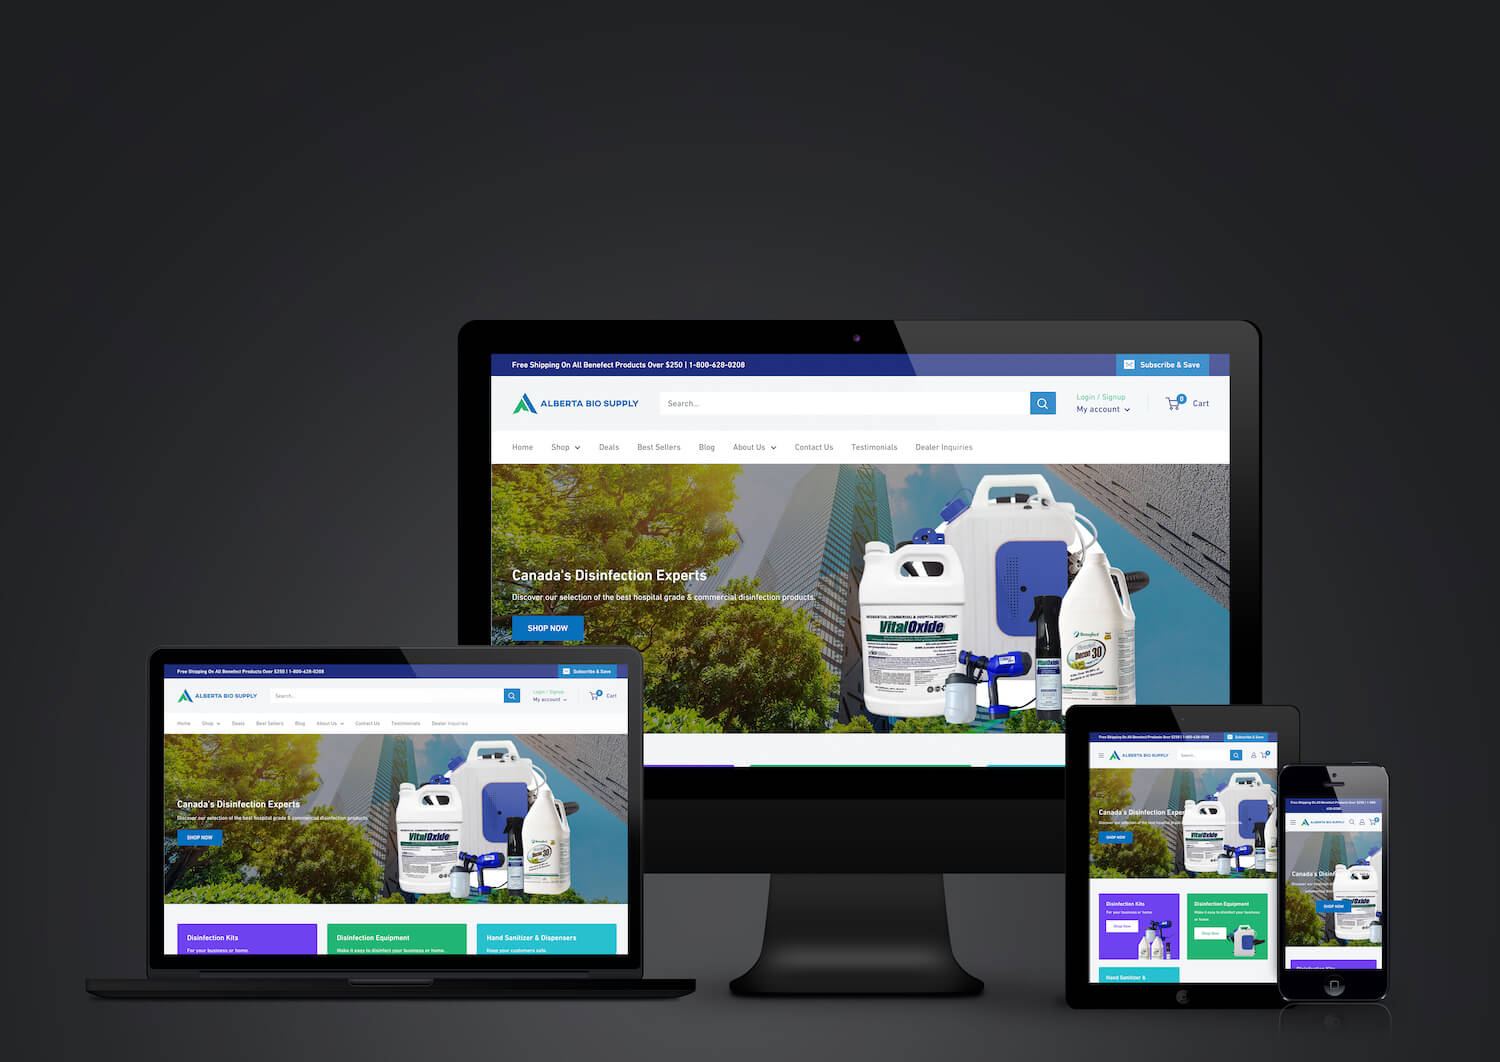 canadas disinfection experts alberta bio supply launches new e commerce website02 - Canada’s Disinfection Experts Alberta Bio Supply Launches New e-Commerce Website